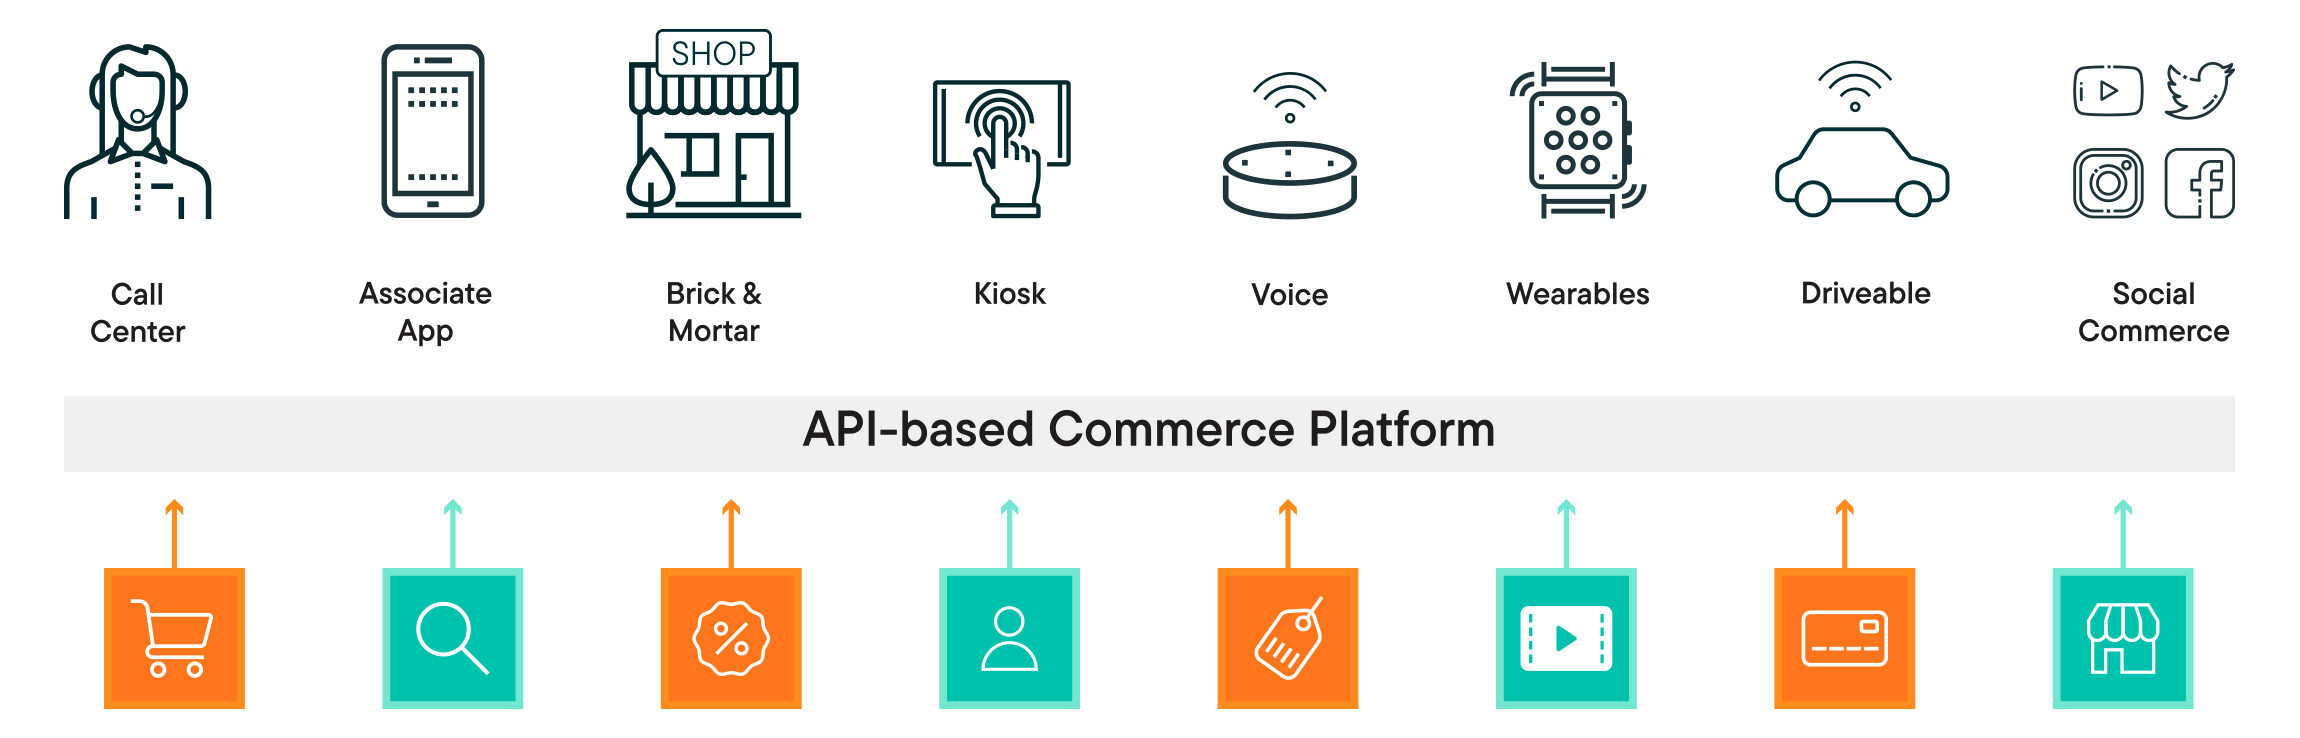 Channel orchestration with APIs by commercetools